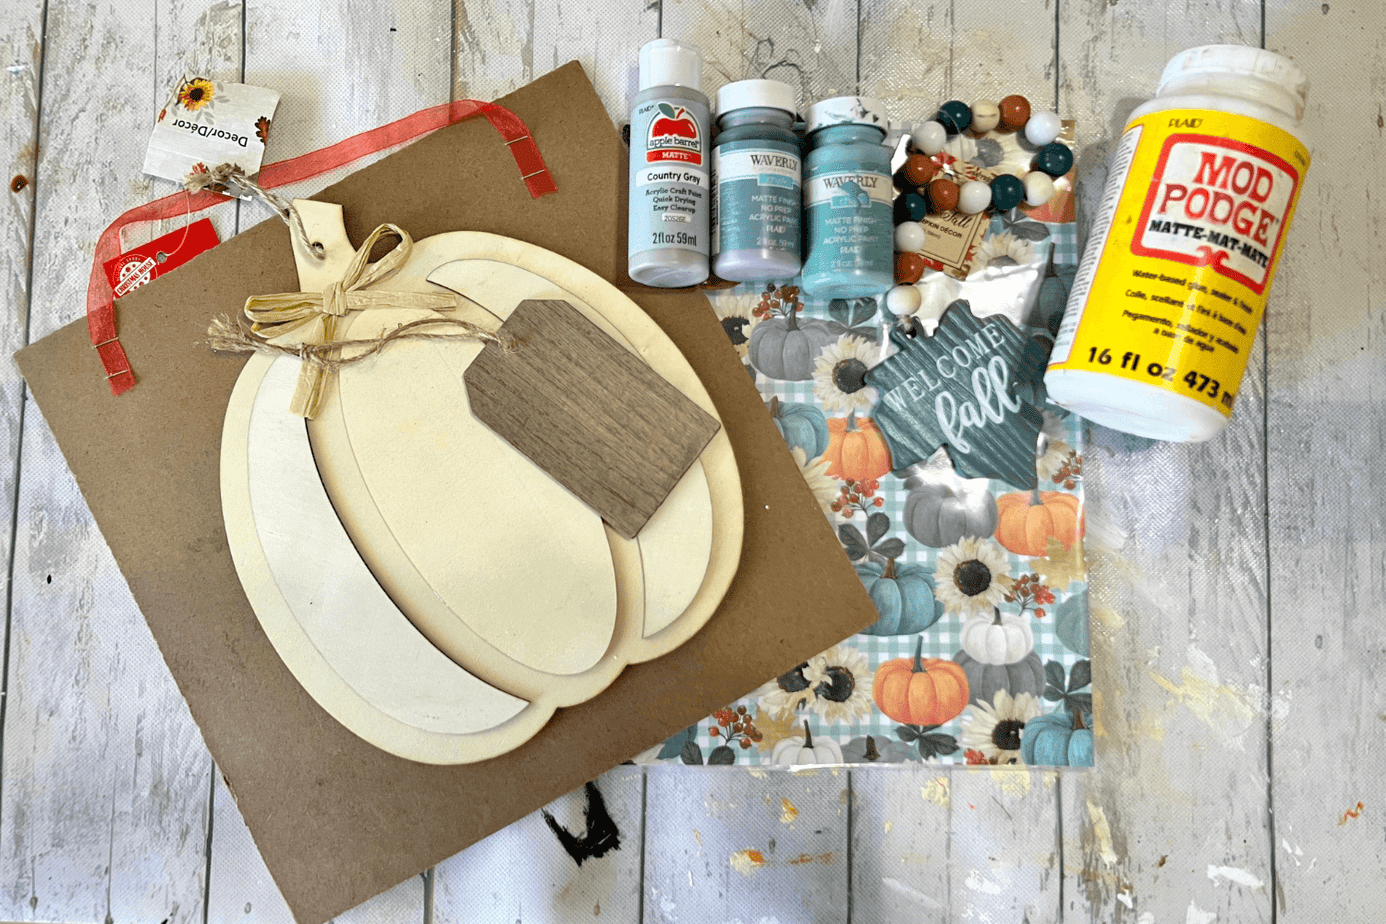 All of the supplies needed for the project laid out on the table. A wood pumpkin, scrapbook paper, wood background, paint, Mod Podge, and wood bead garland.